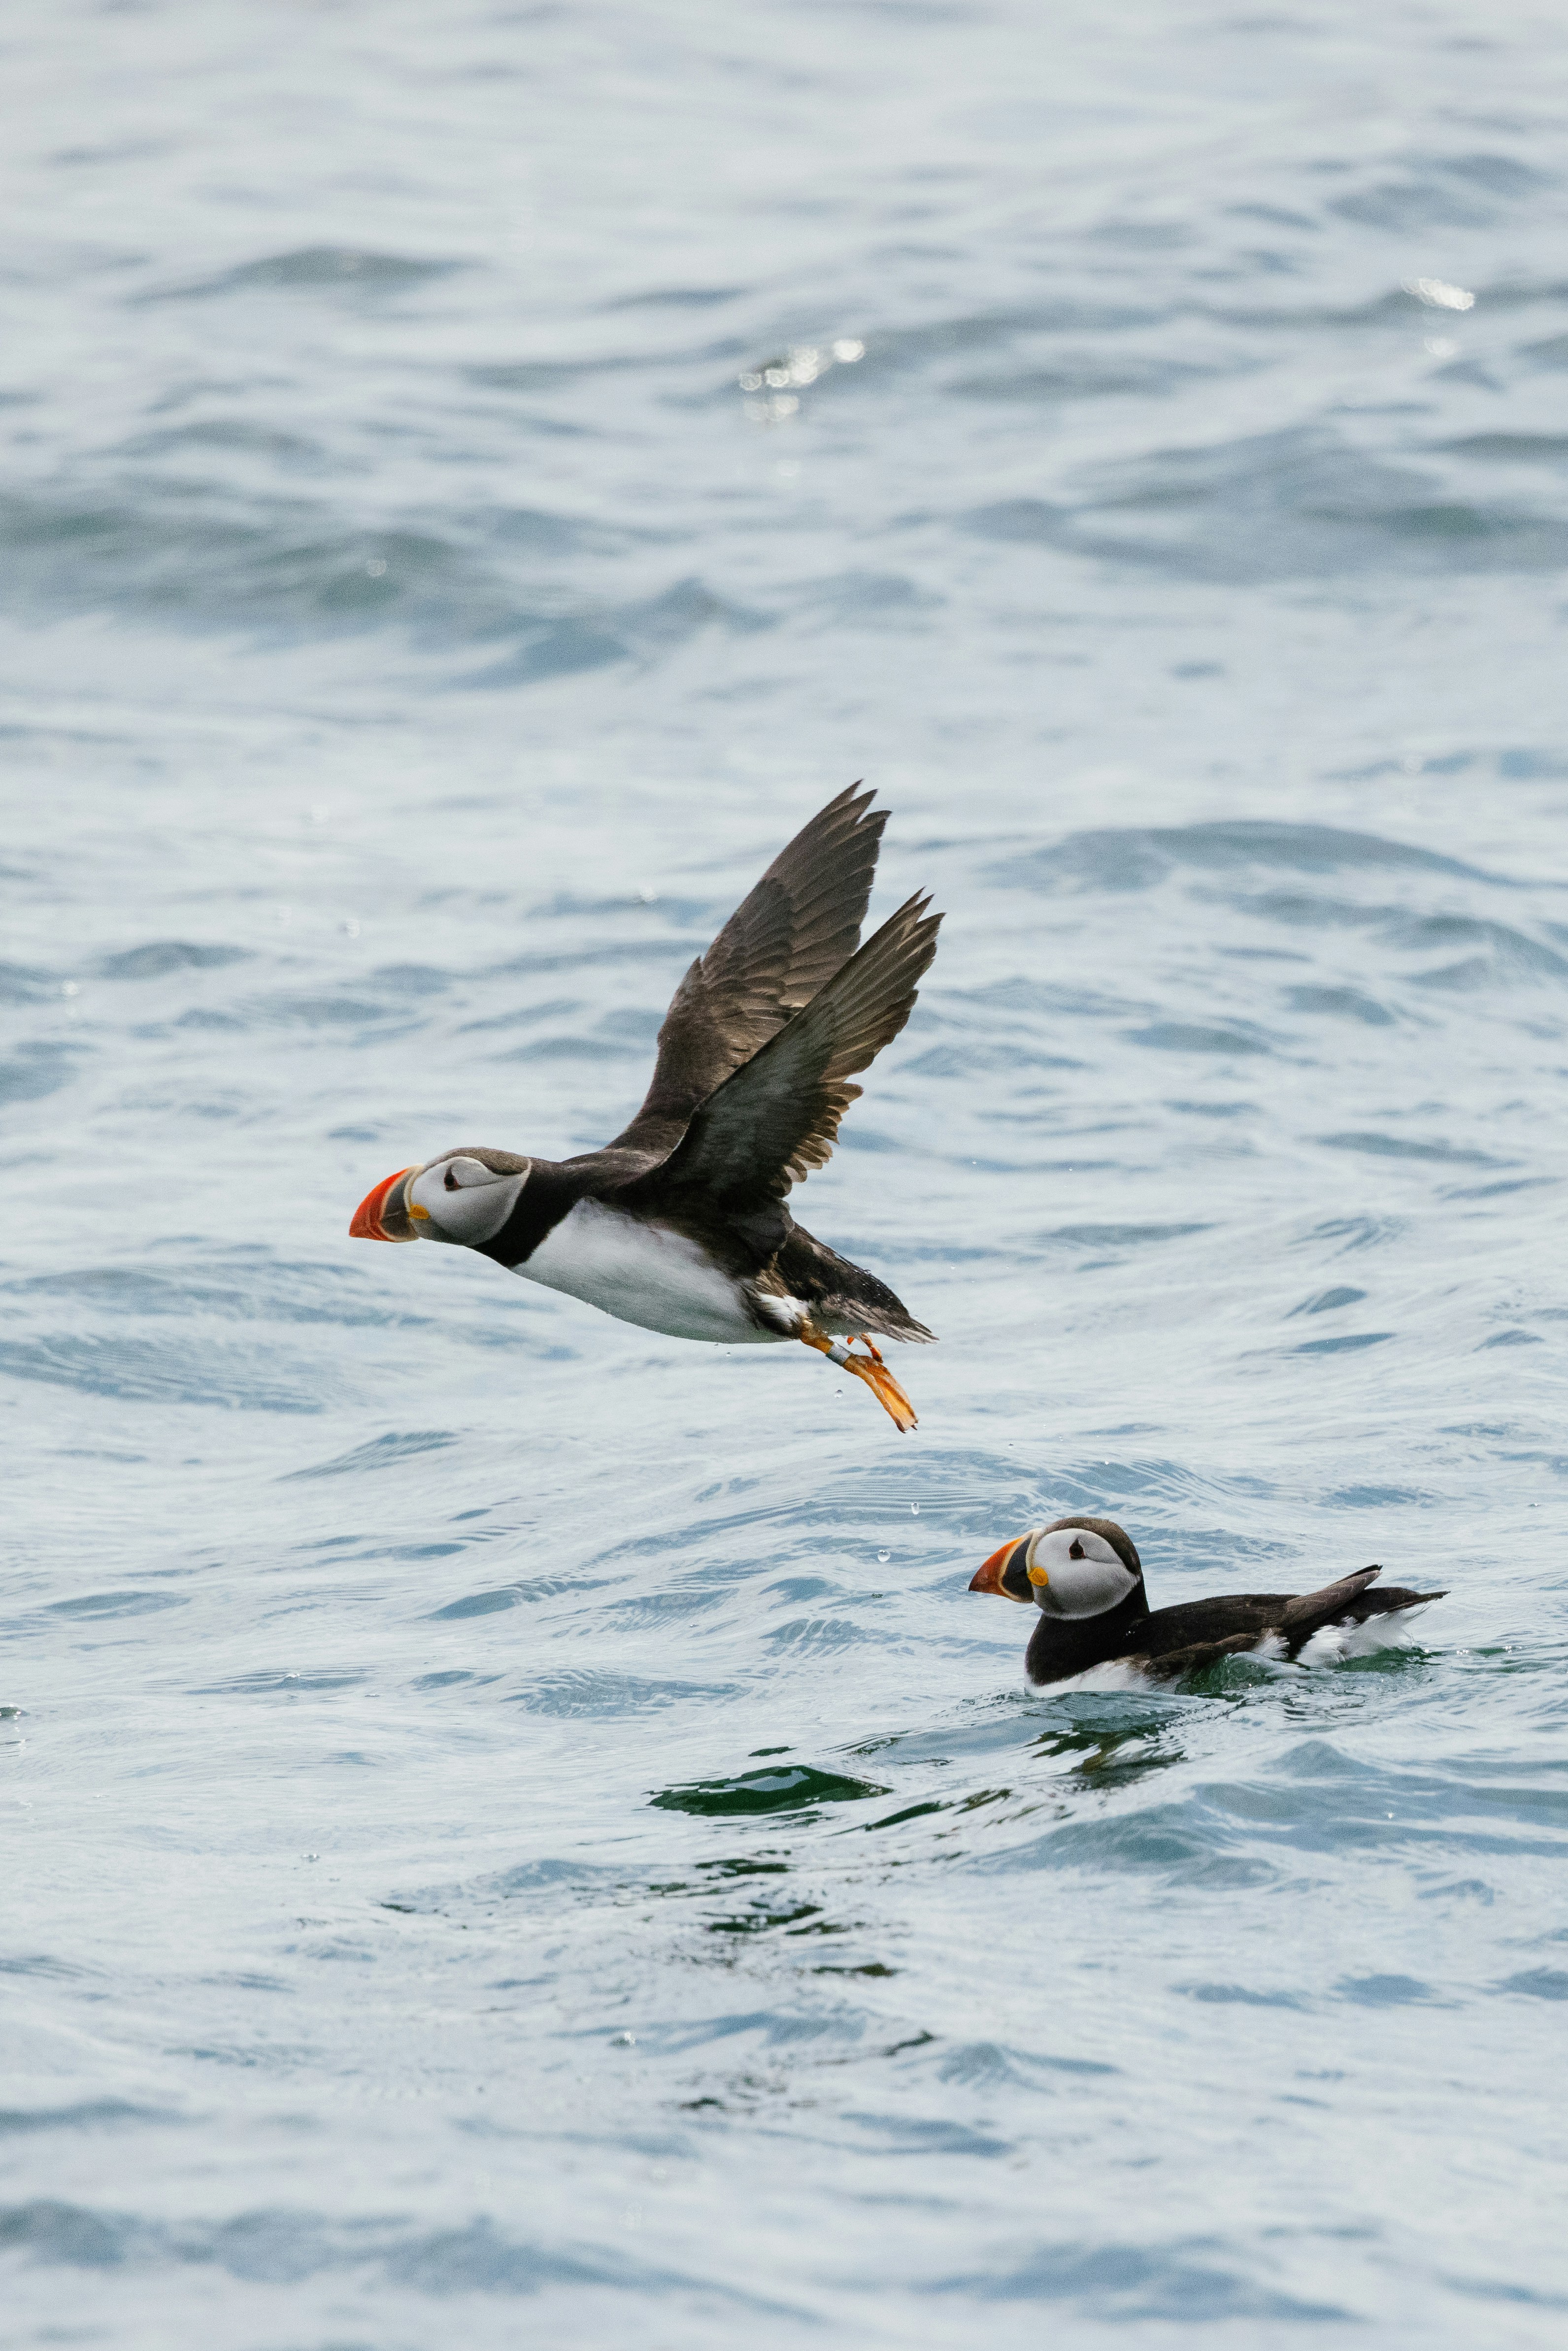 An Atlantic Puffin takes flight after swimming in the Atlantic Ocean on a cloudy summer day near Eastern Egg Rock, Maine. Another Atlantic Puffin swims nearby.